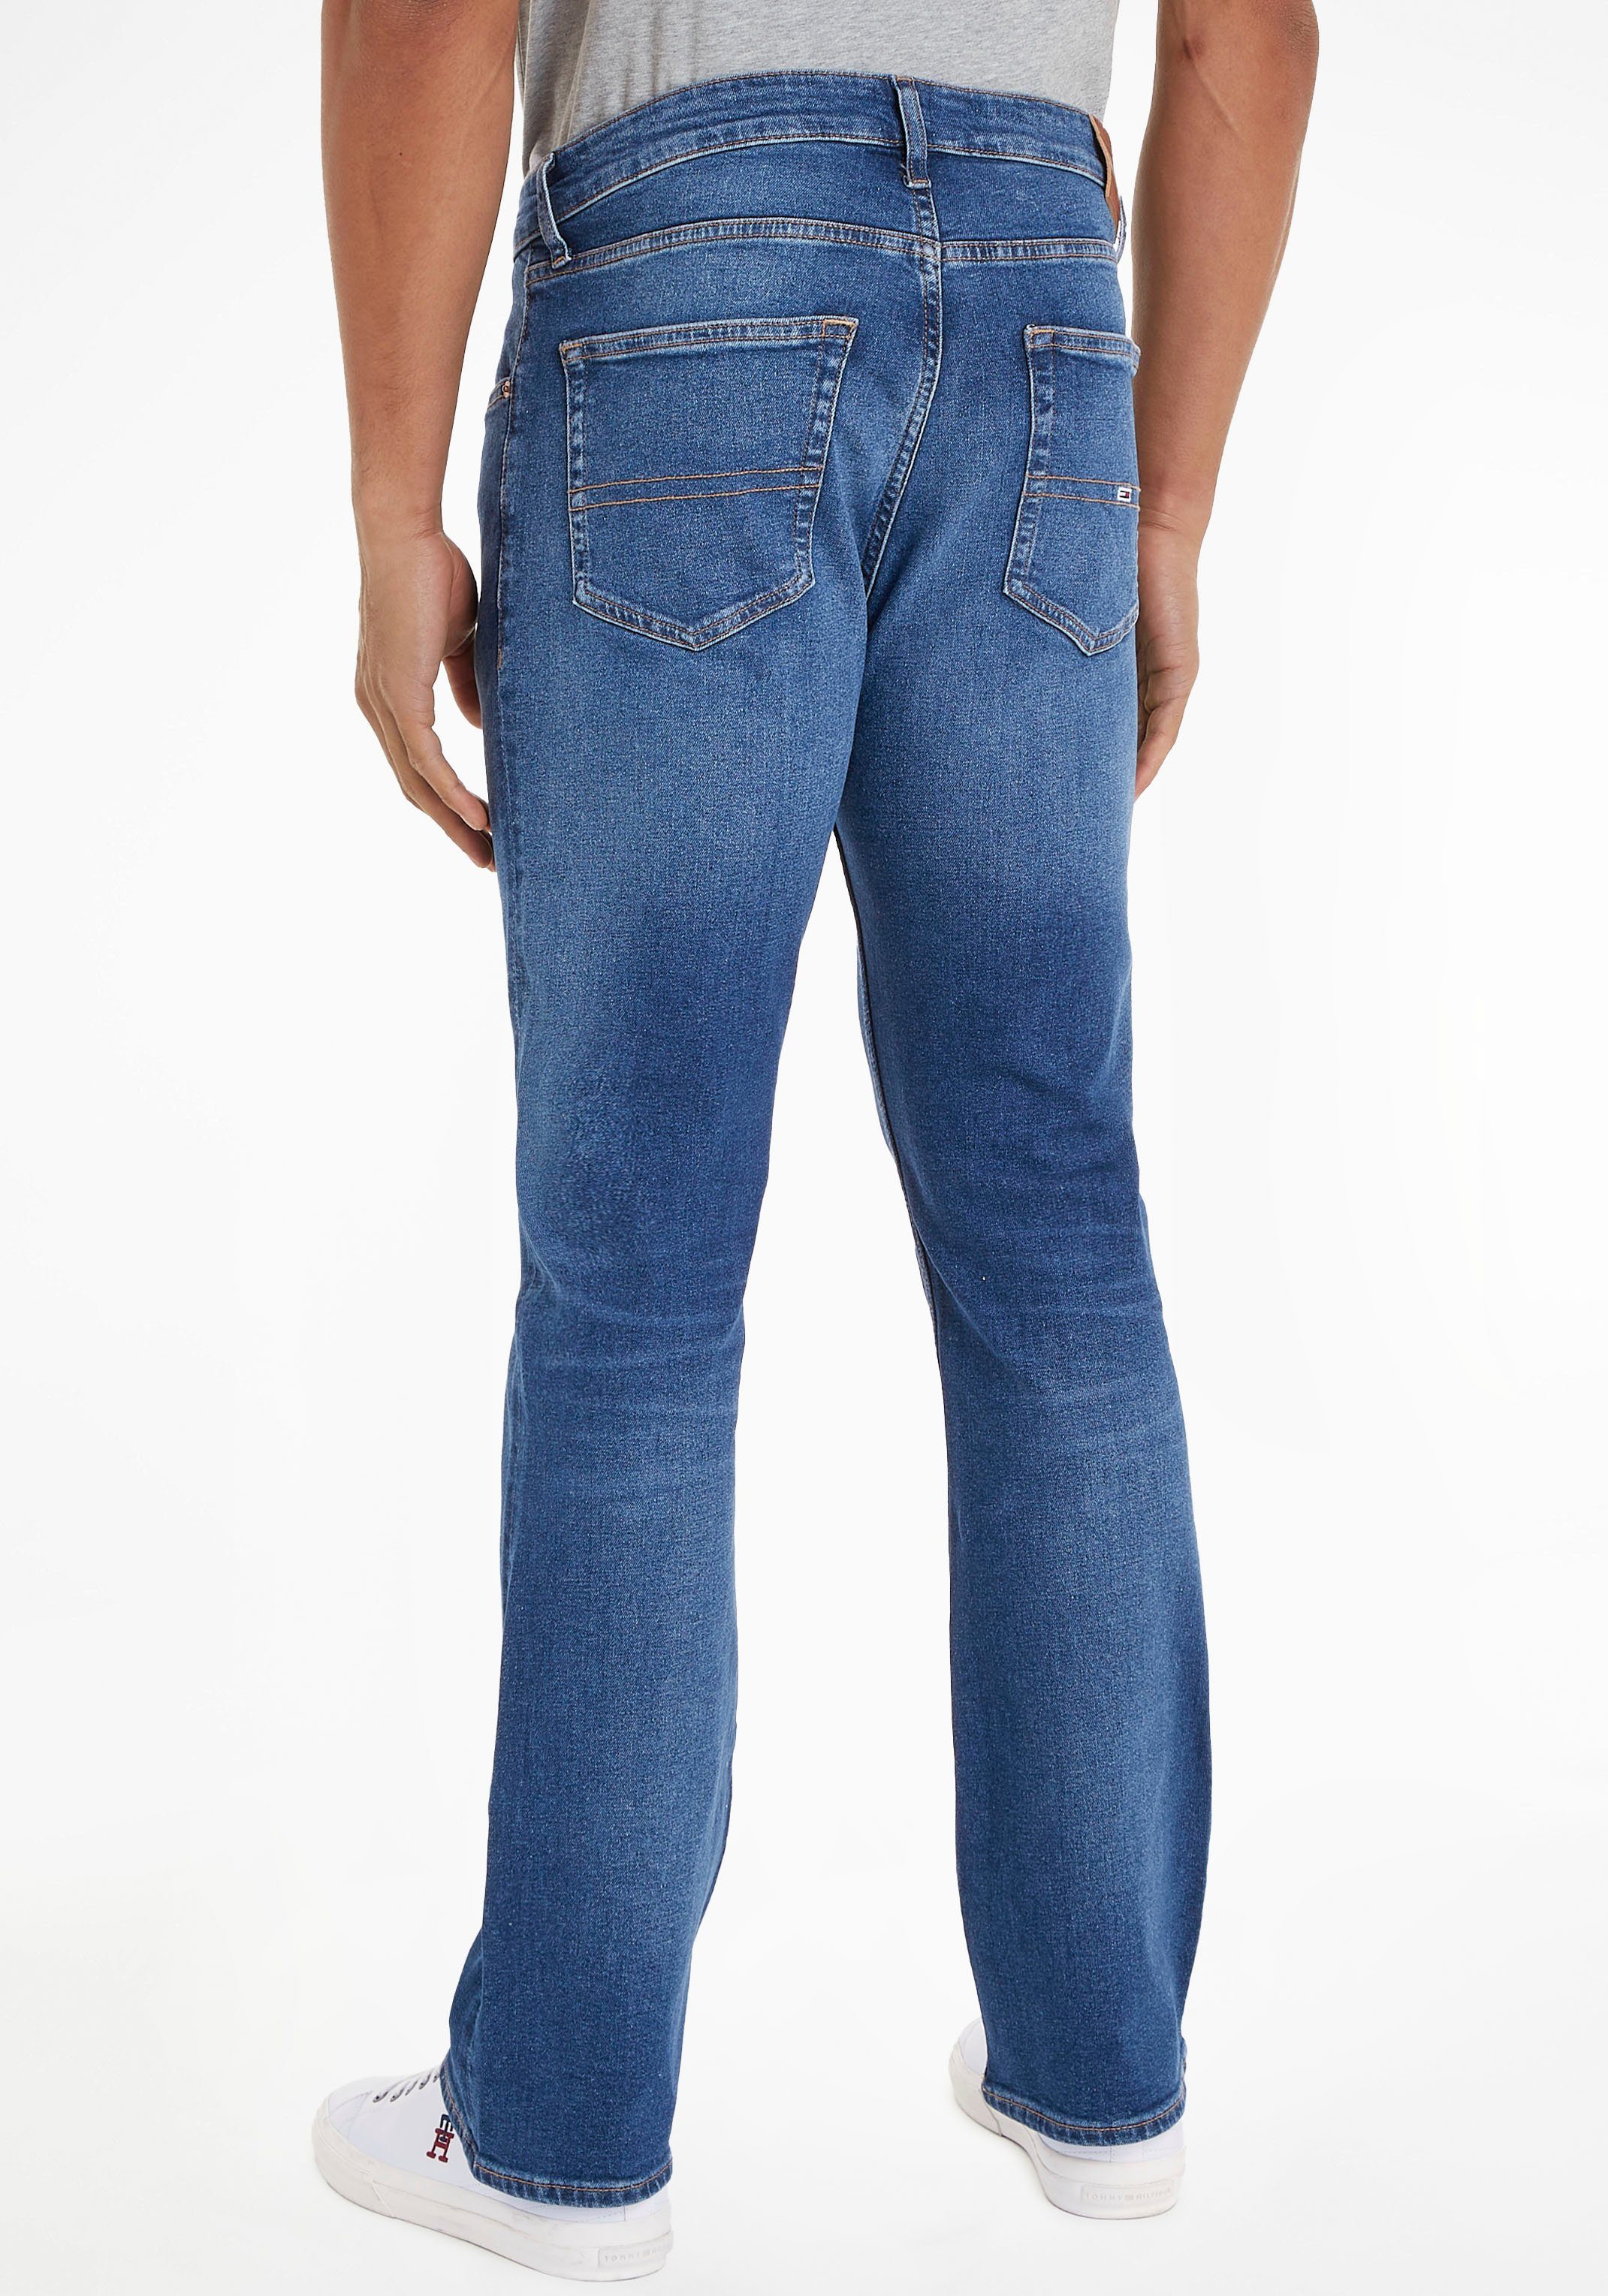 TOMMY JEANS Bootcut jeans RYAN BOOTCUT AH5168